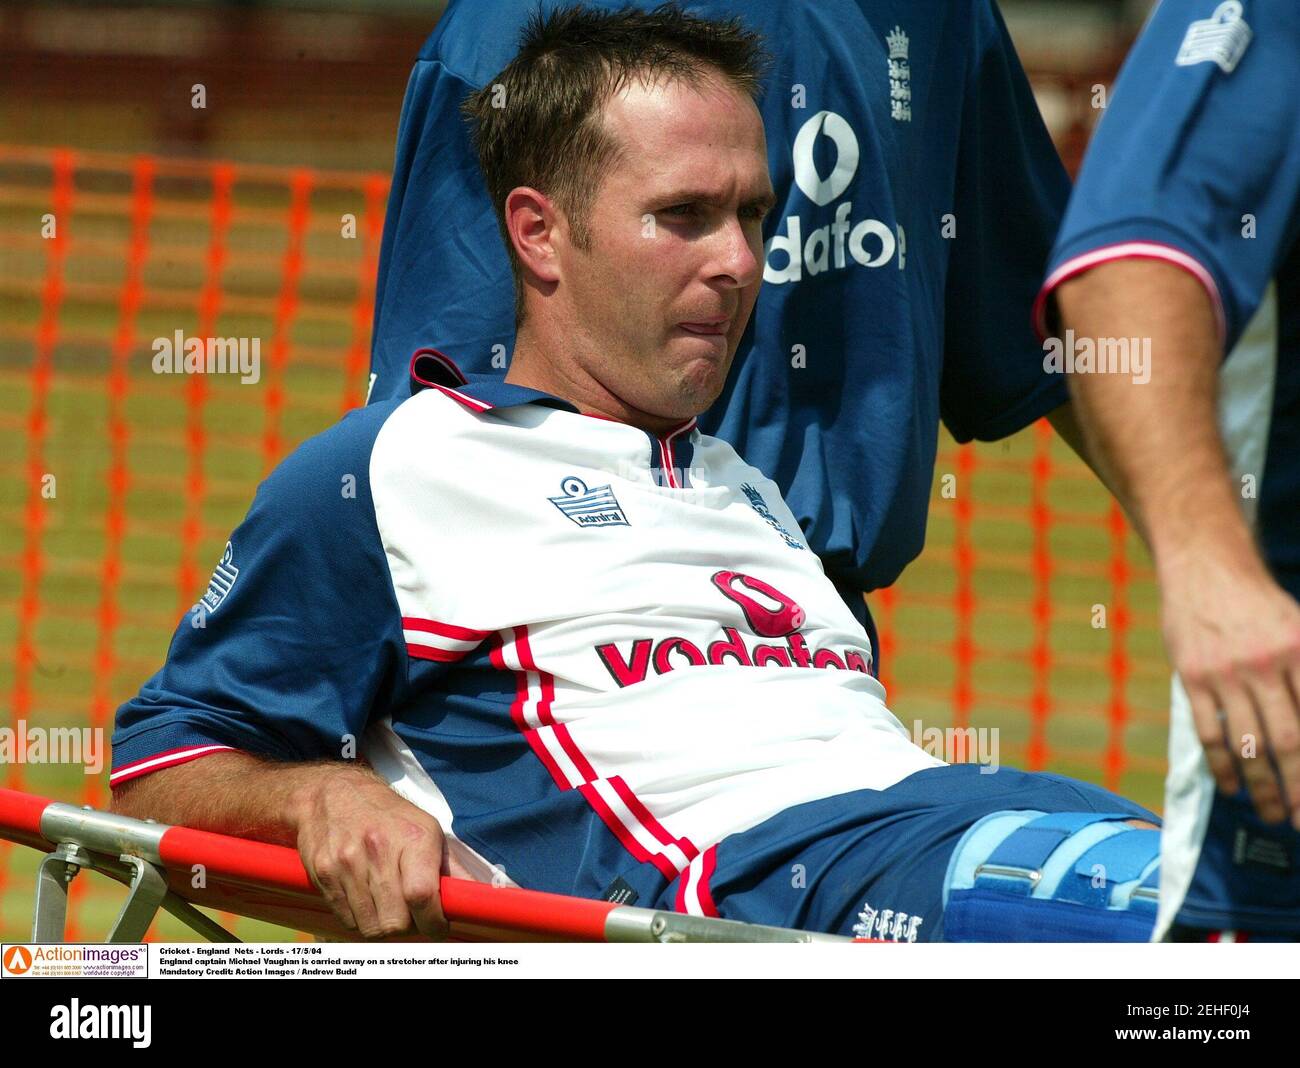 Cricket - England  Nets - Lord's  - 17/5/04  England captain Michael Vaughan is carried away on a stretcher after injuring his knee  Mandatory Credit: Action Images / Andrew Budd Stock Photo